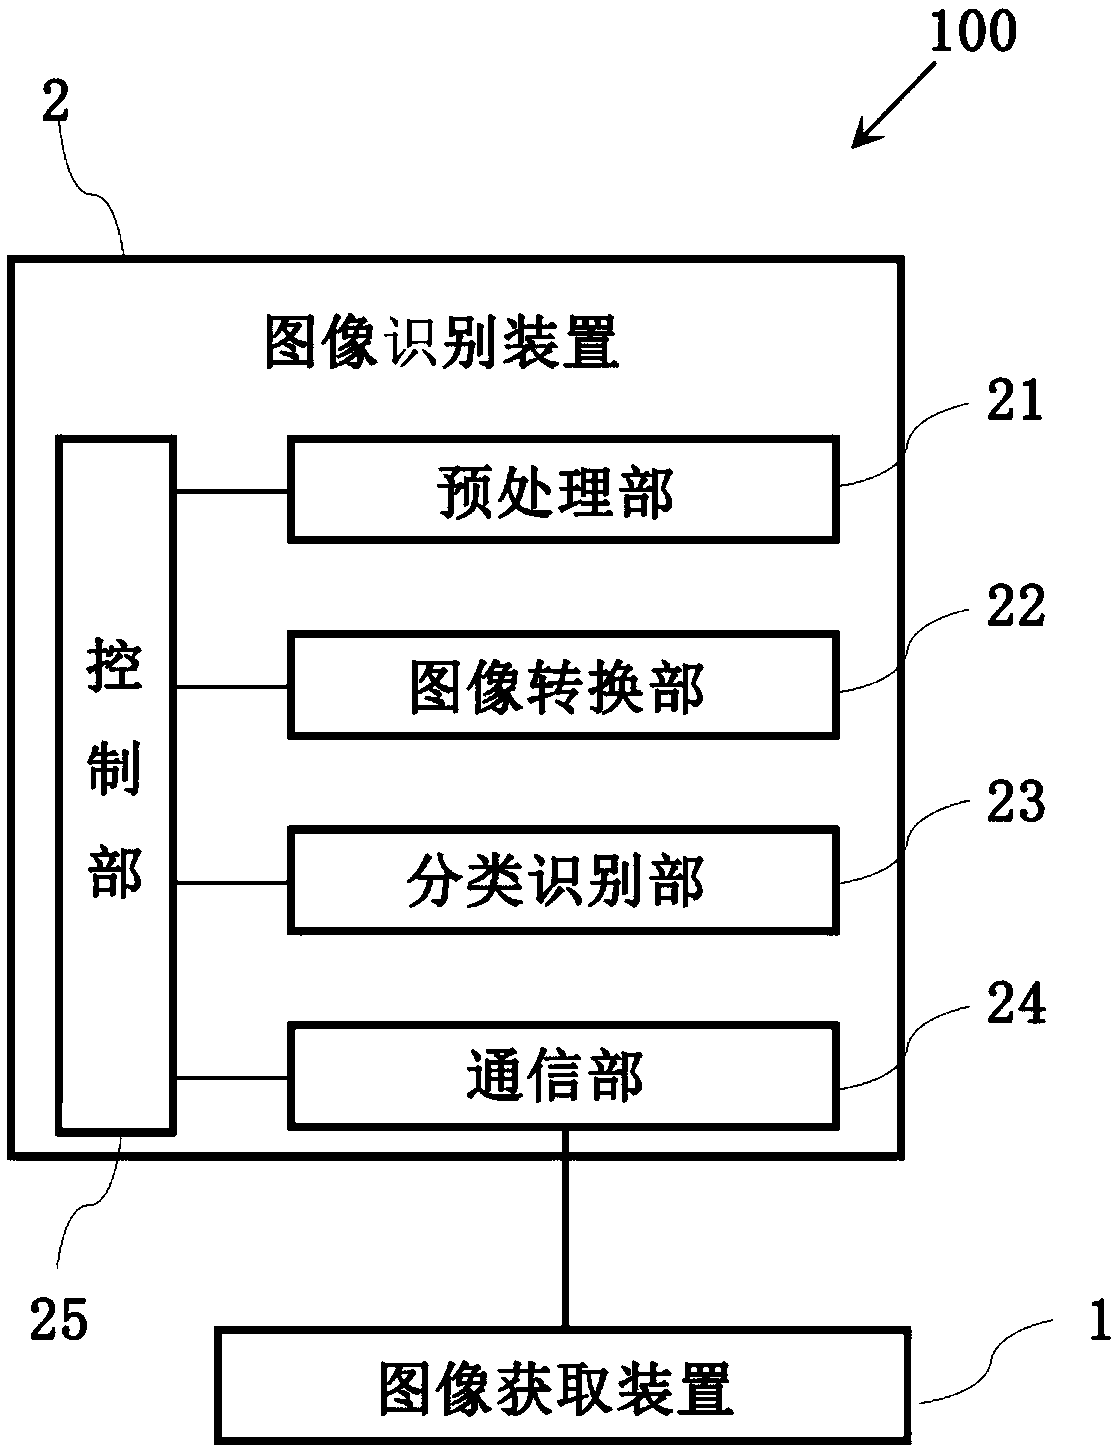 Cancer cell image recognition device and equipment based on quantum gate circuit neural networks